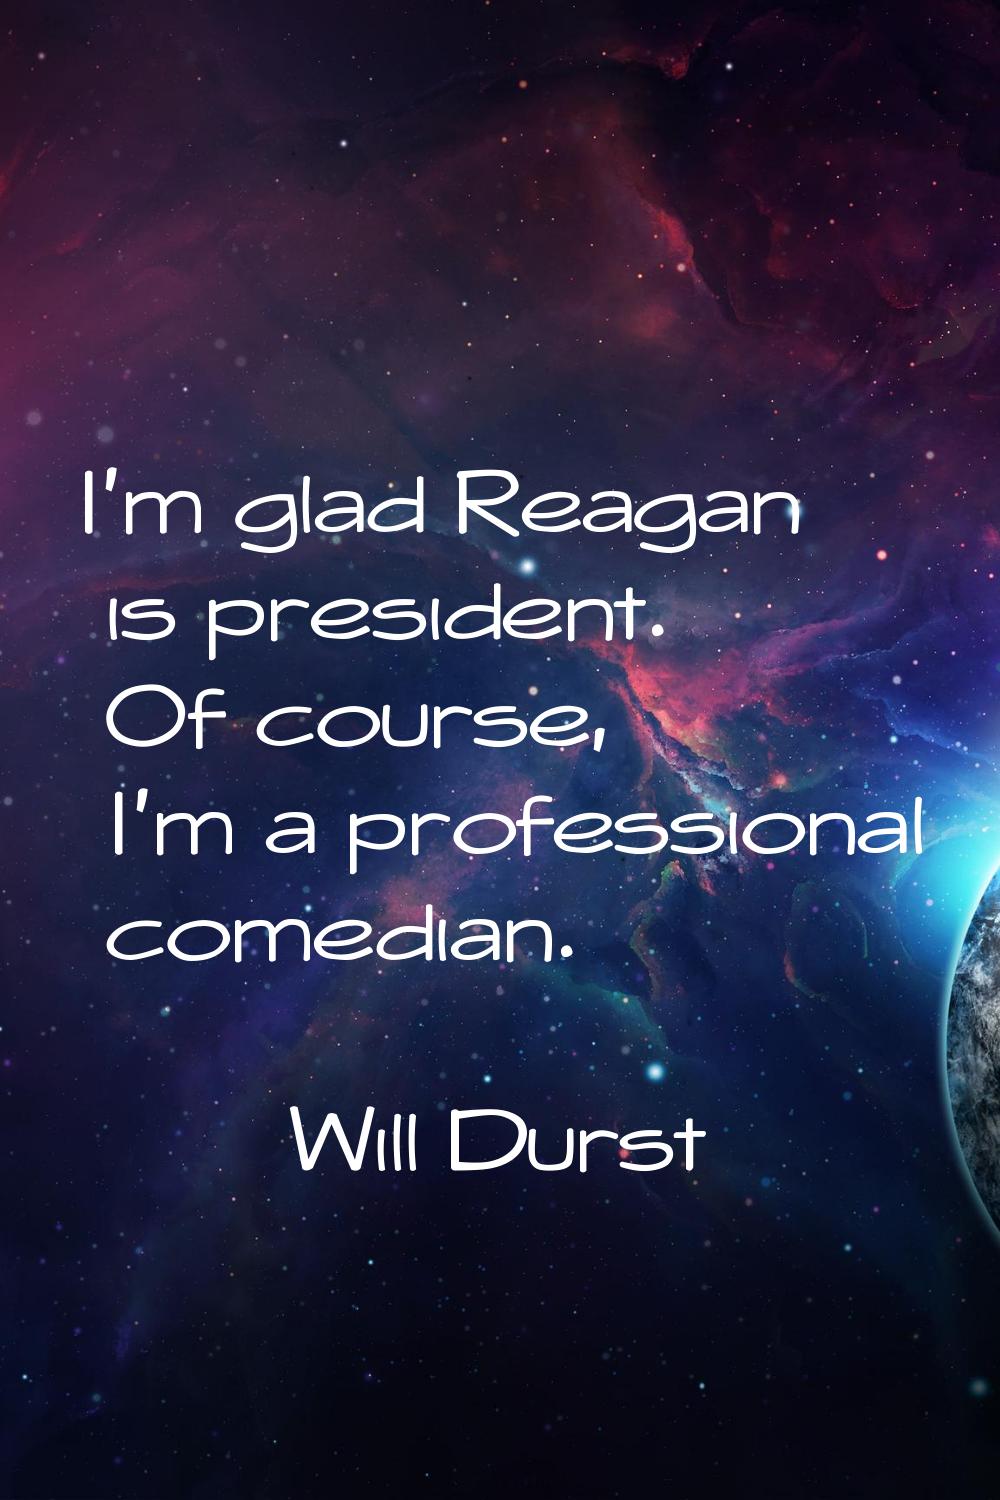 I'm glad Reagan is president. Of course, I'm a professional comedian.